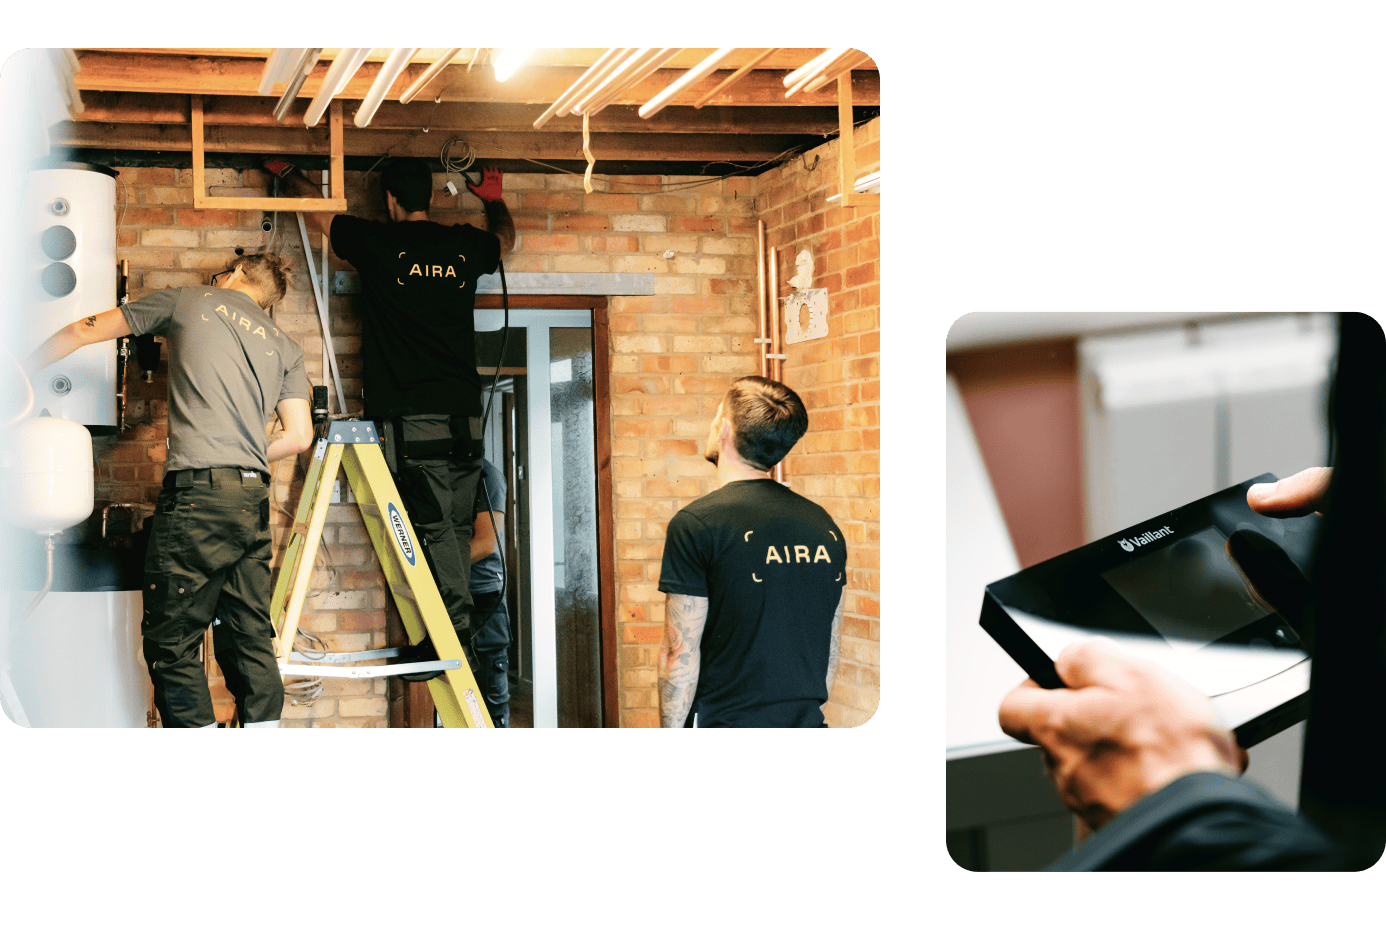 Heat pump installers from Aira finishing the installation of a hot water tank for an air to water heat pump and programming a thermostat